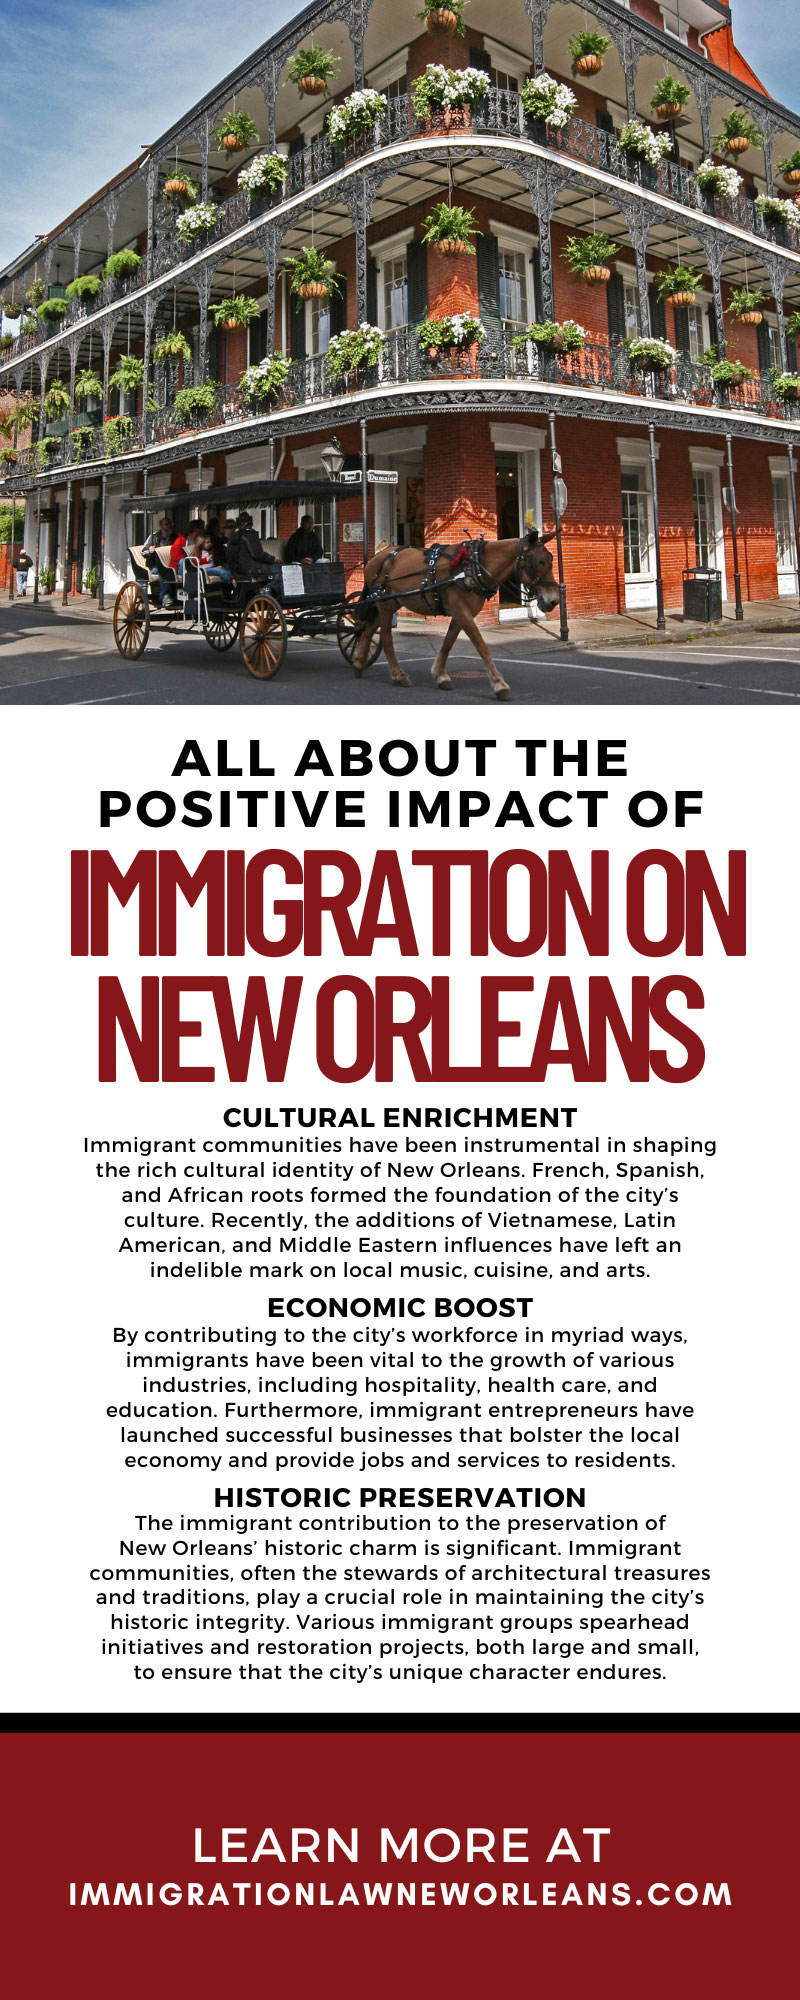 All About the Positive Impact of Immigration on New Orleans